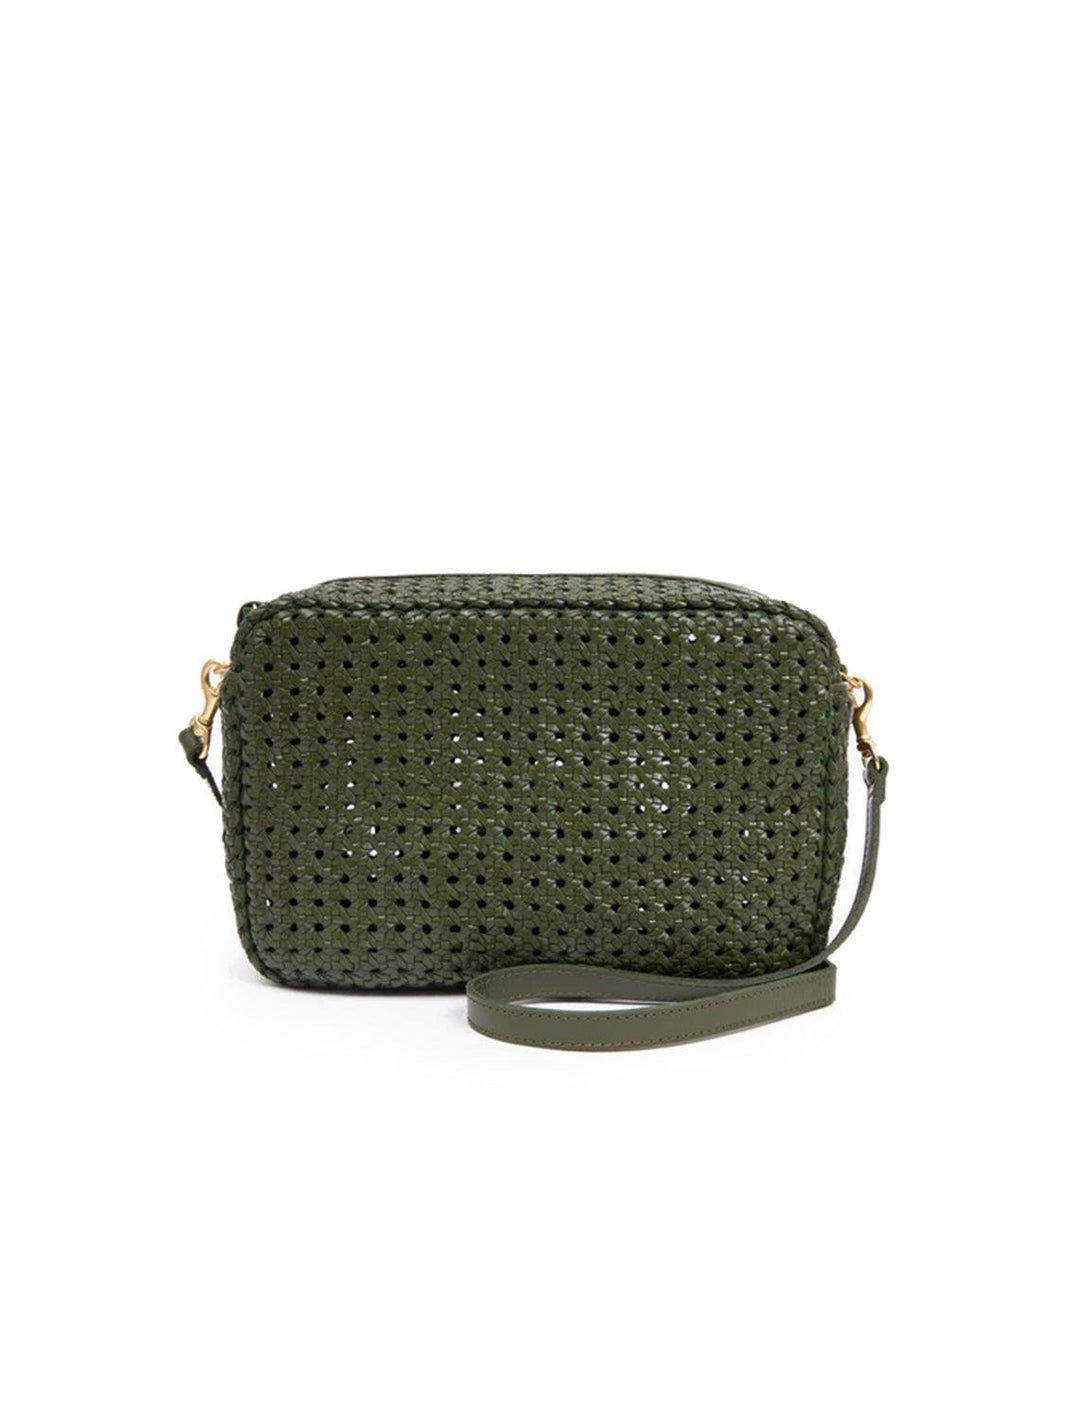 Front view of Clare V.'s marisol crossbody bag in army rattan.